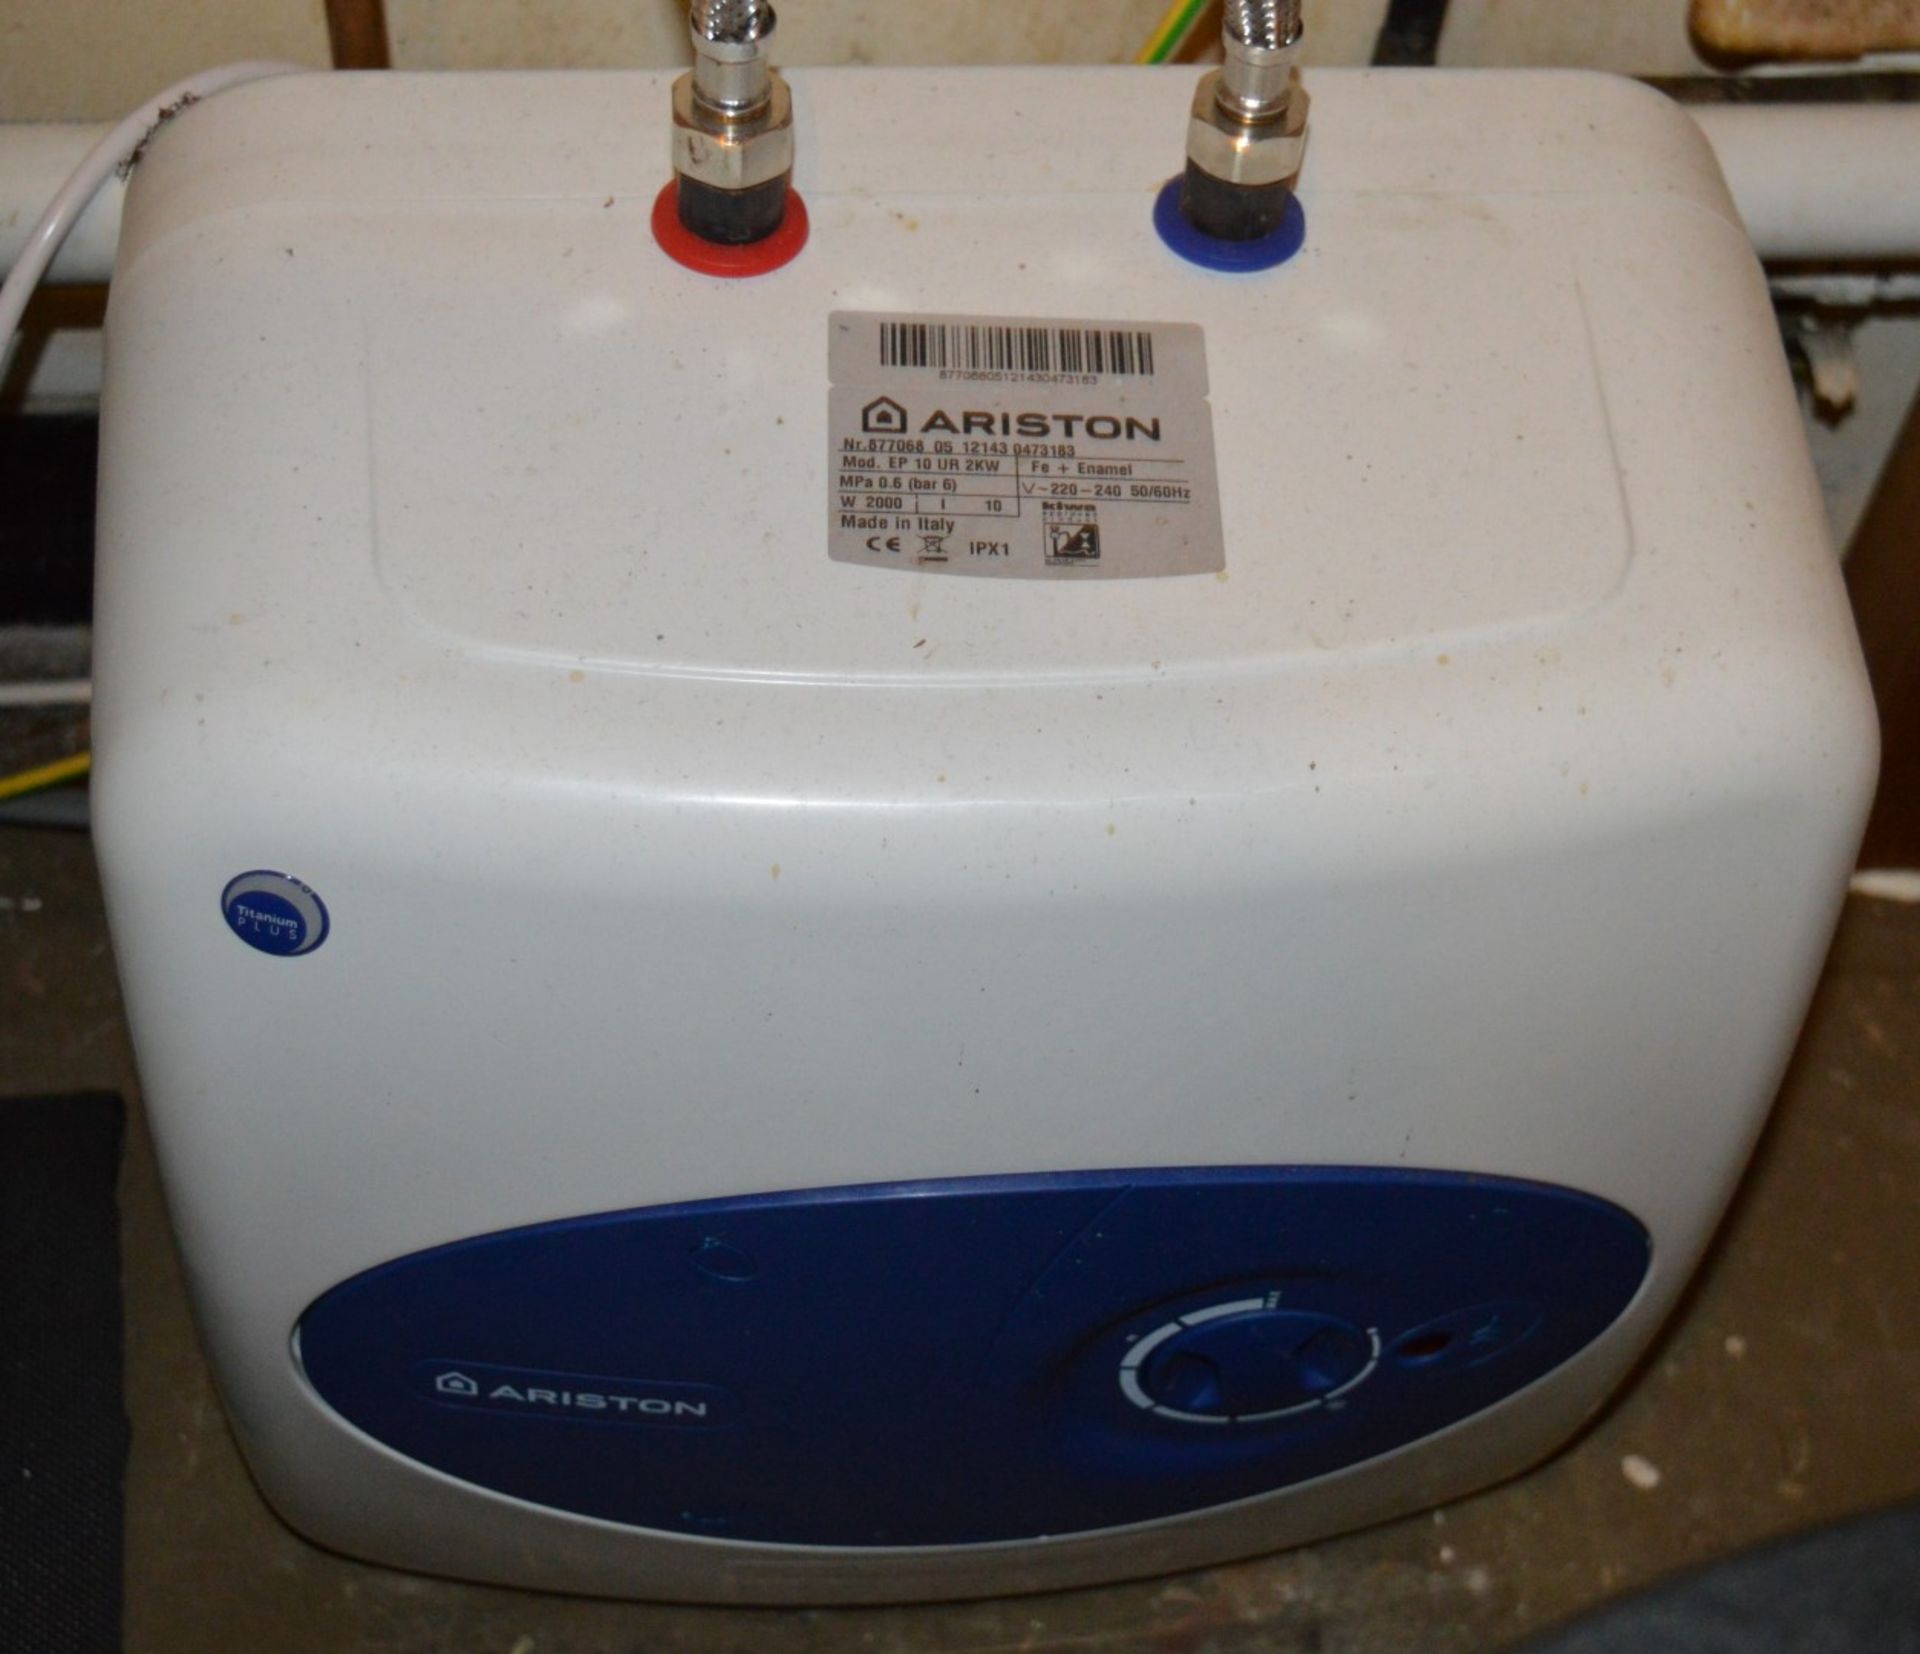 1 x Ariston Europrisma UNDER SINK Water Heater - 3kW 10 Litres - Model EP 10 UR 2KW - Ideal For - Image 2 of 3